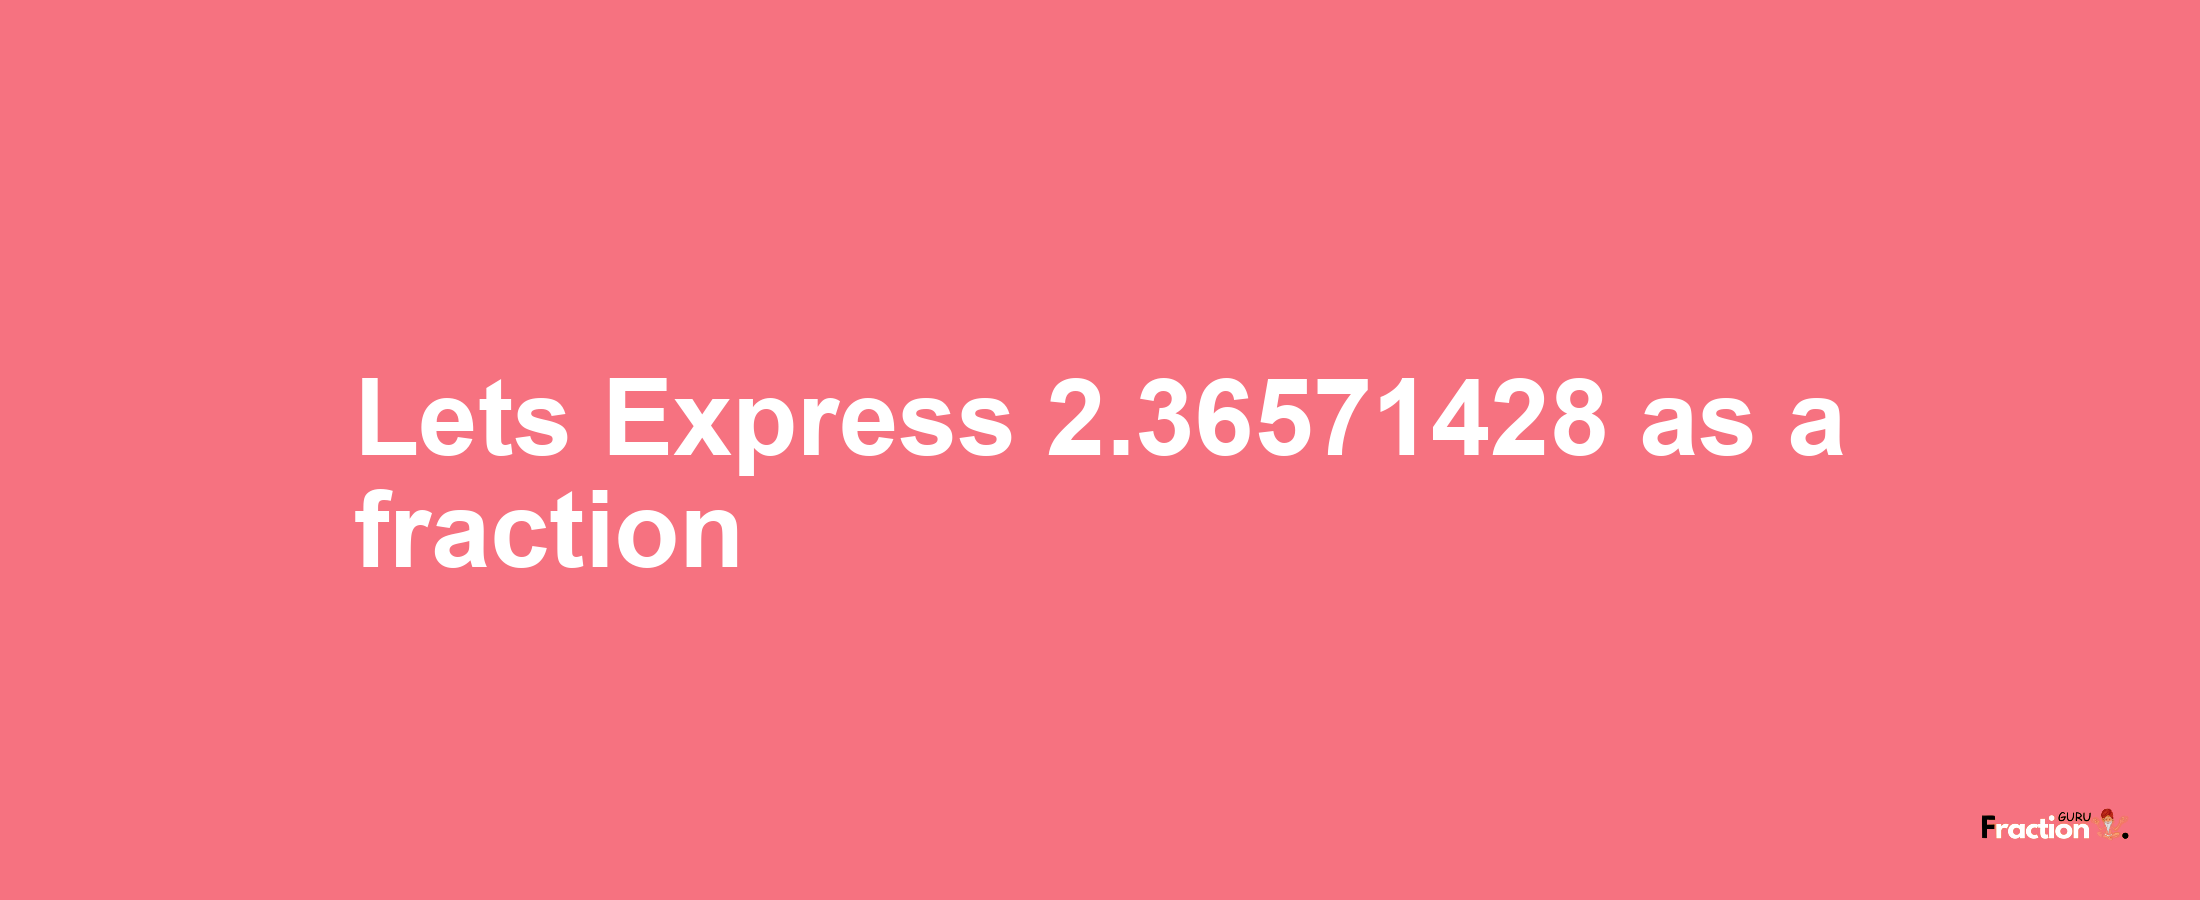 Lets Express 2.36571428 as afraction